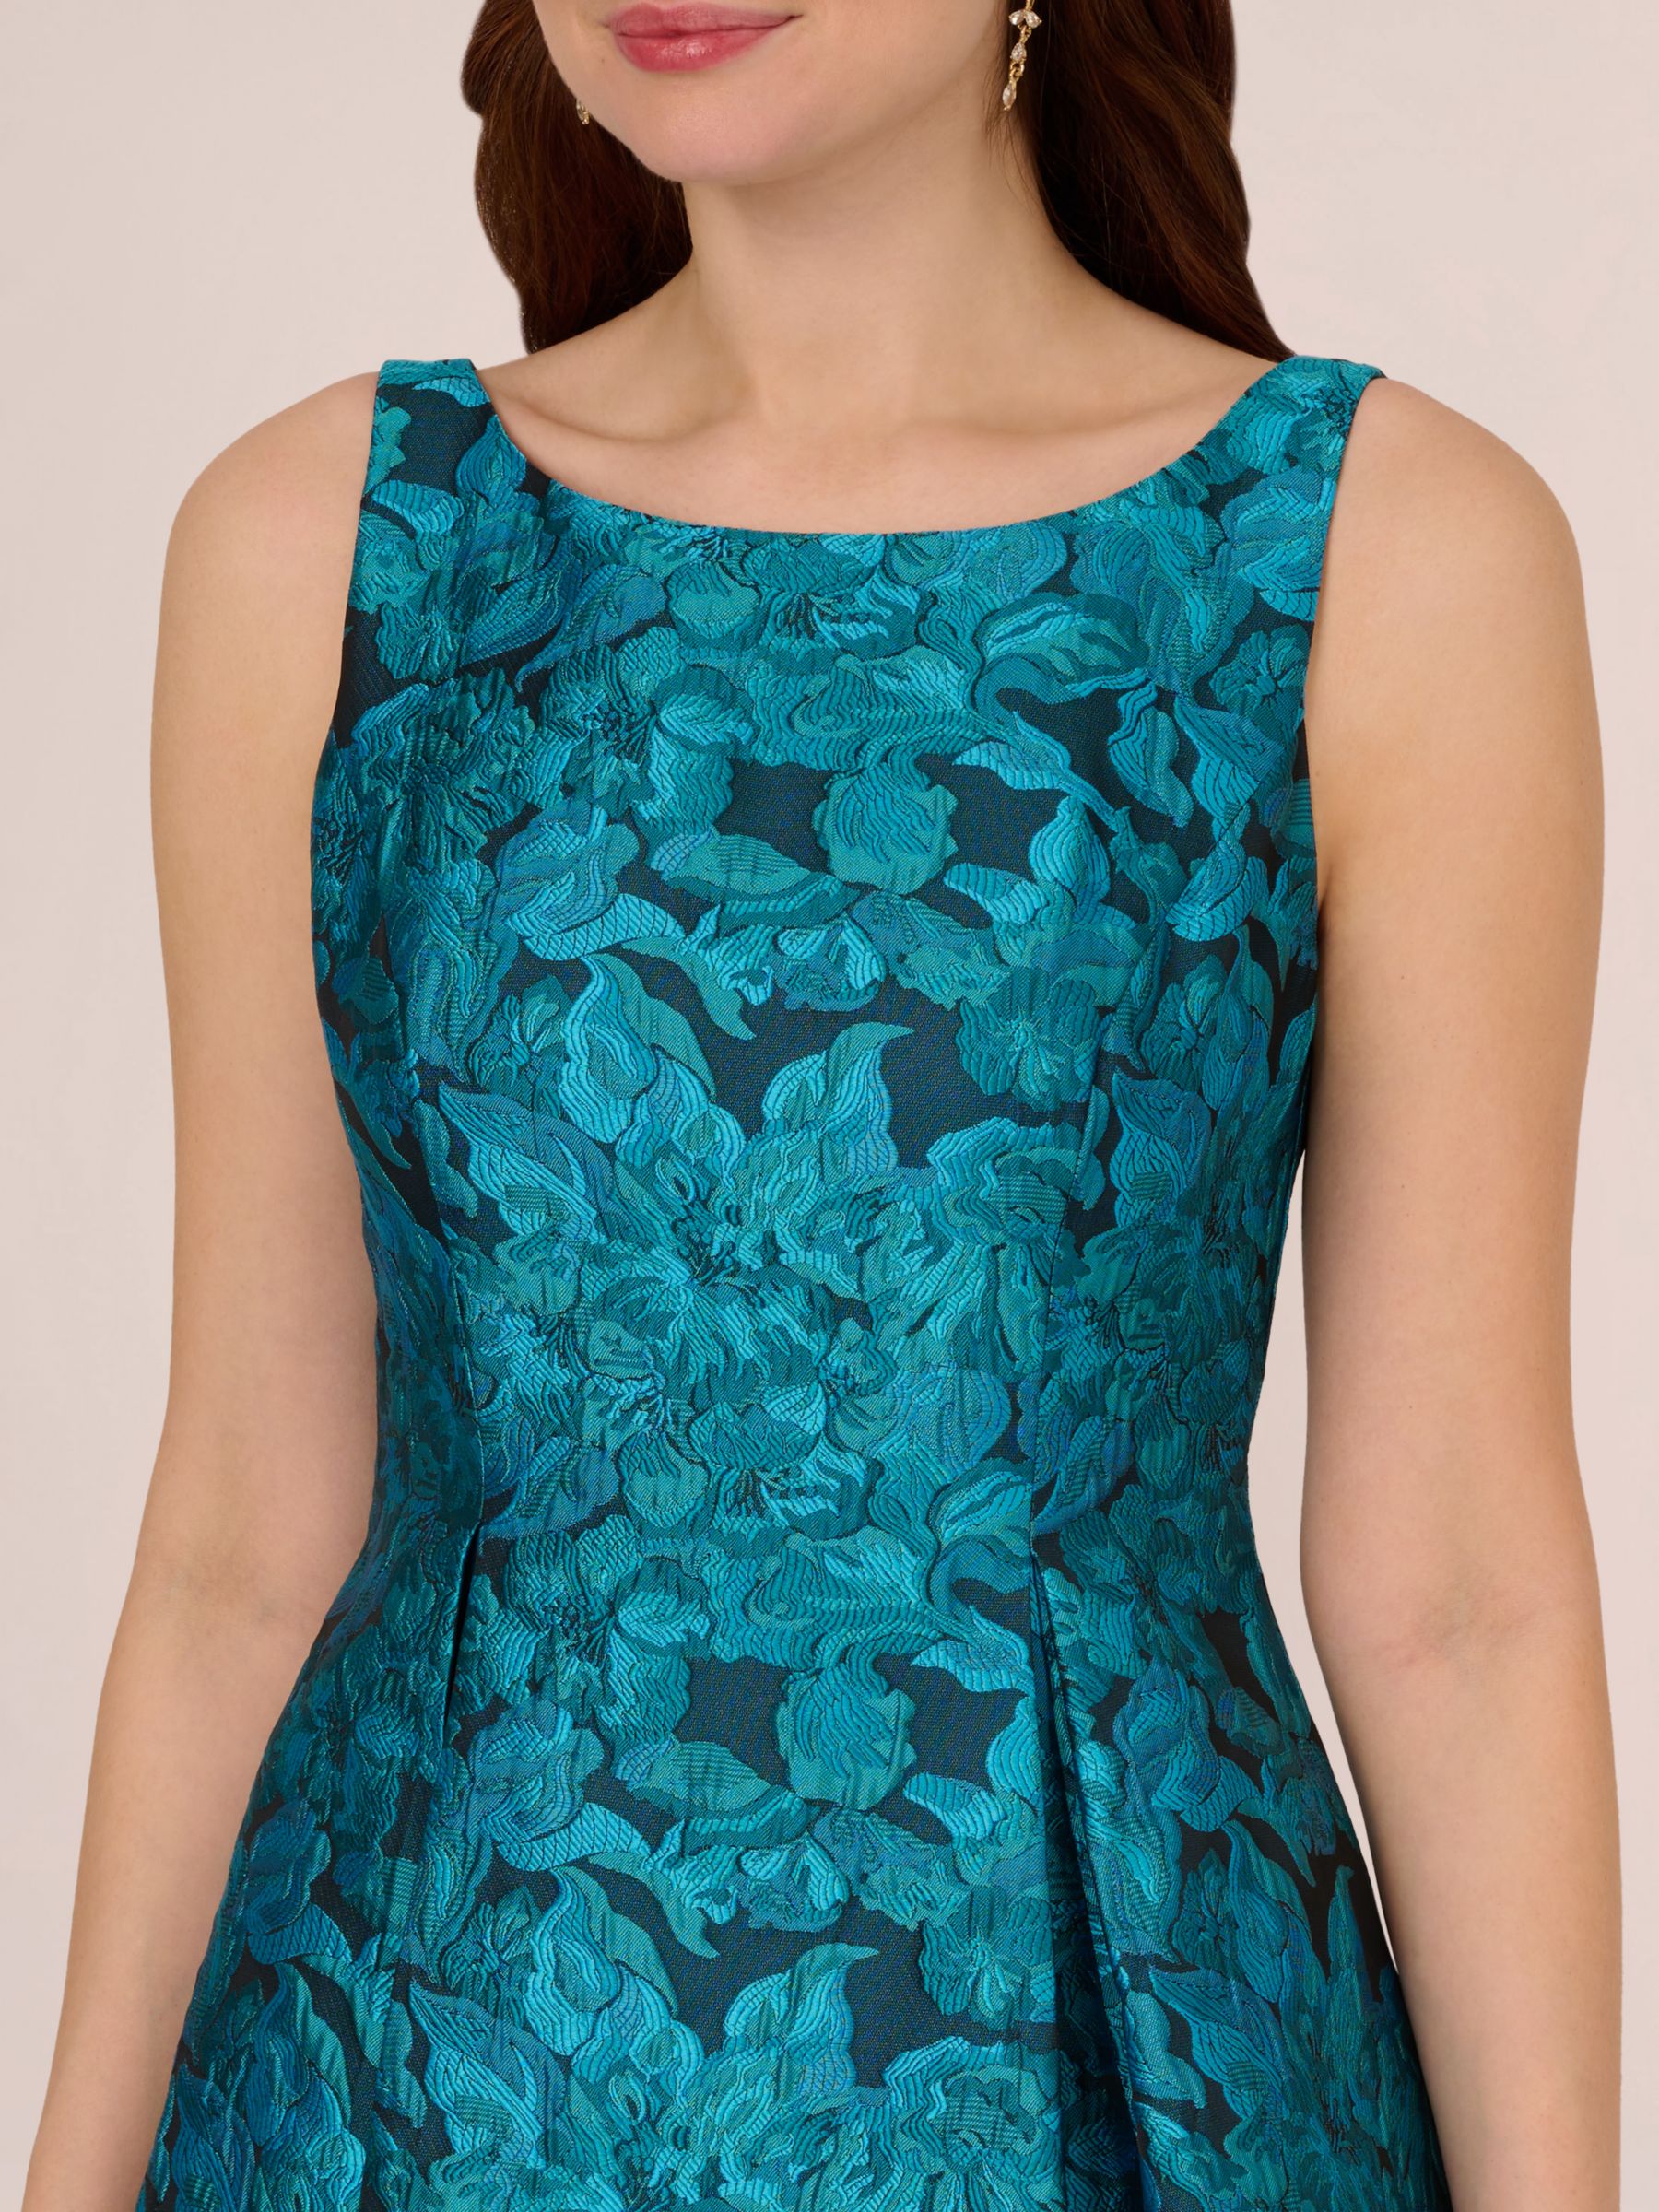 Adrianna Papell Floral Jacquard Flared Dress, Blue, 6